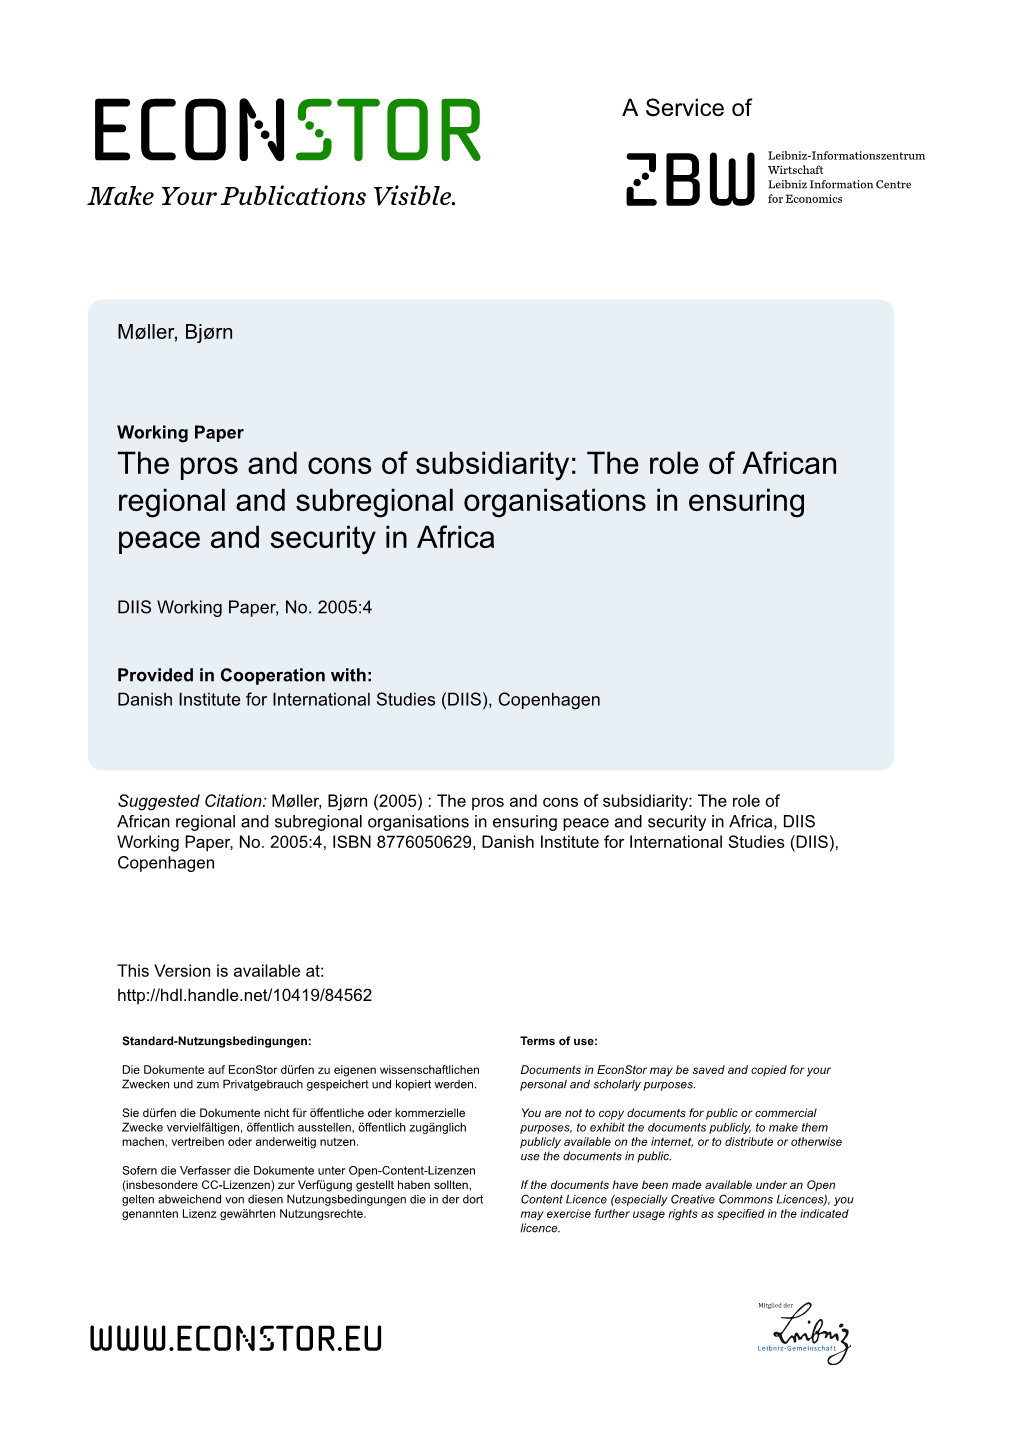 The Role of African Regional and Subregional Organisations in Ensuring Peace and Security in Africa